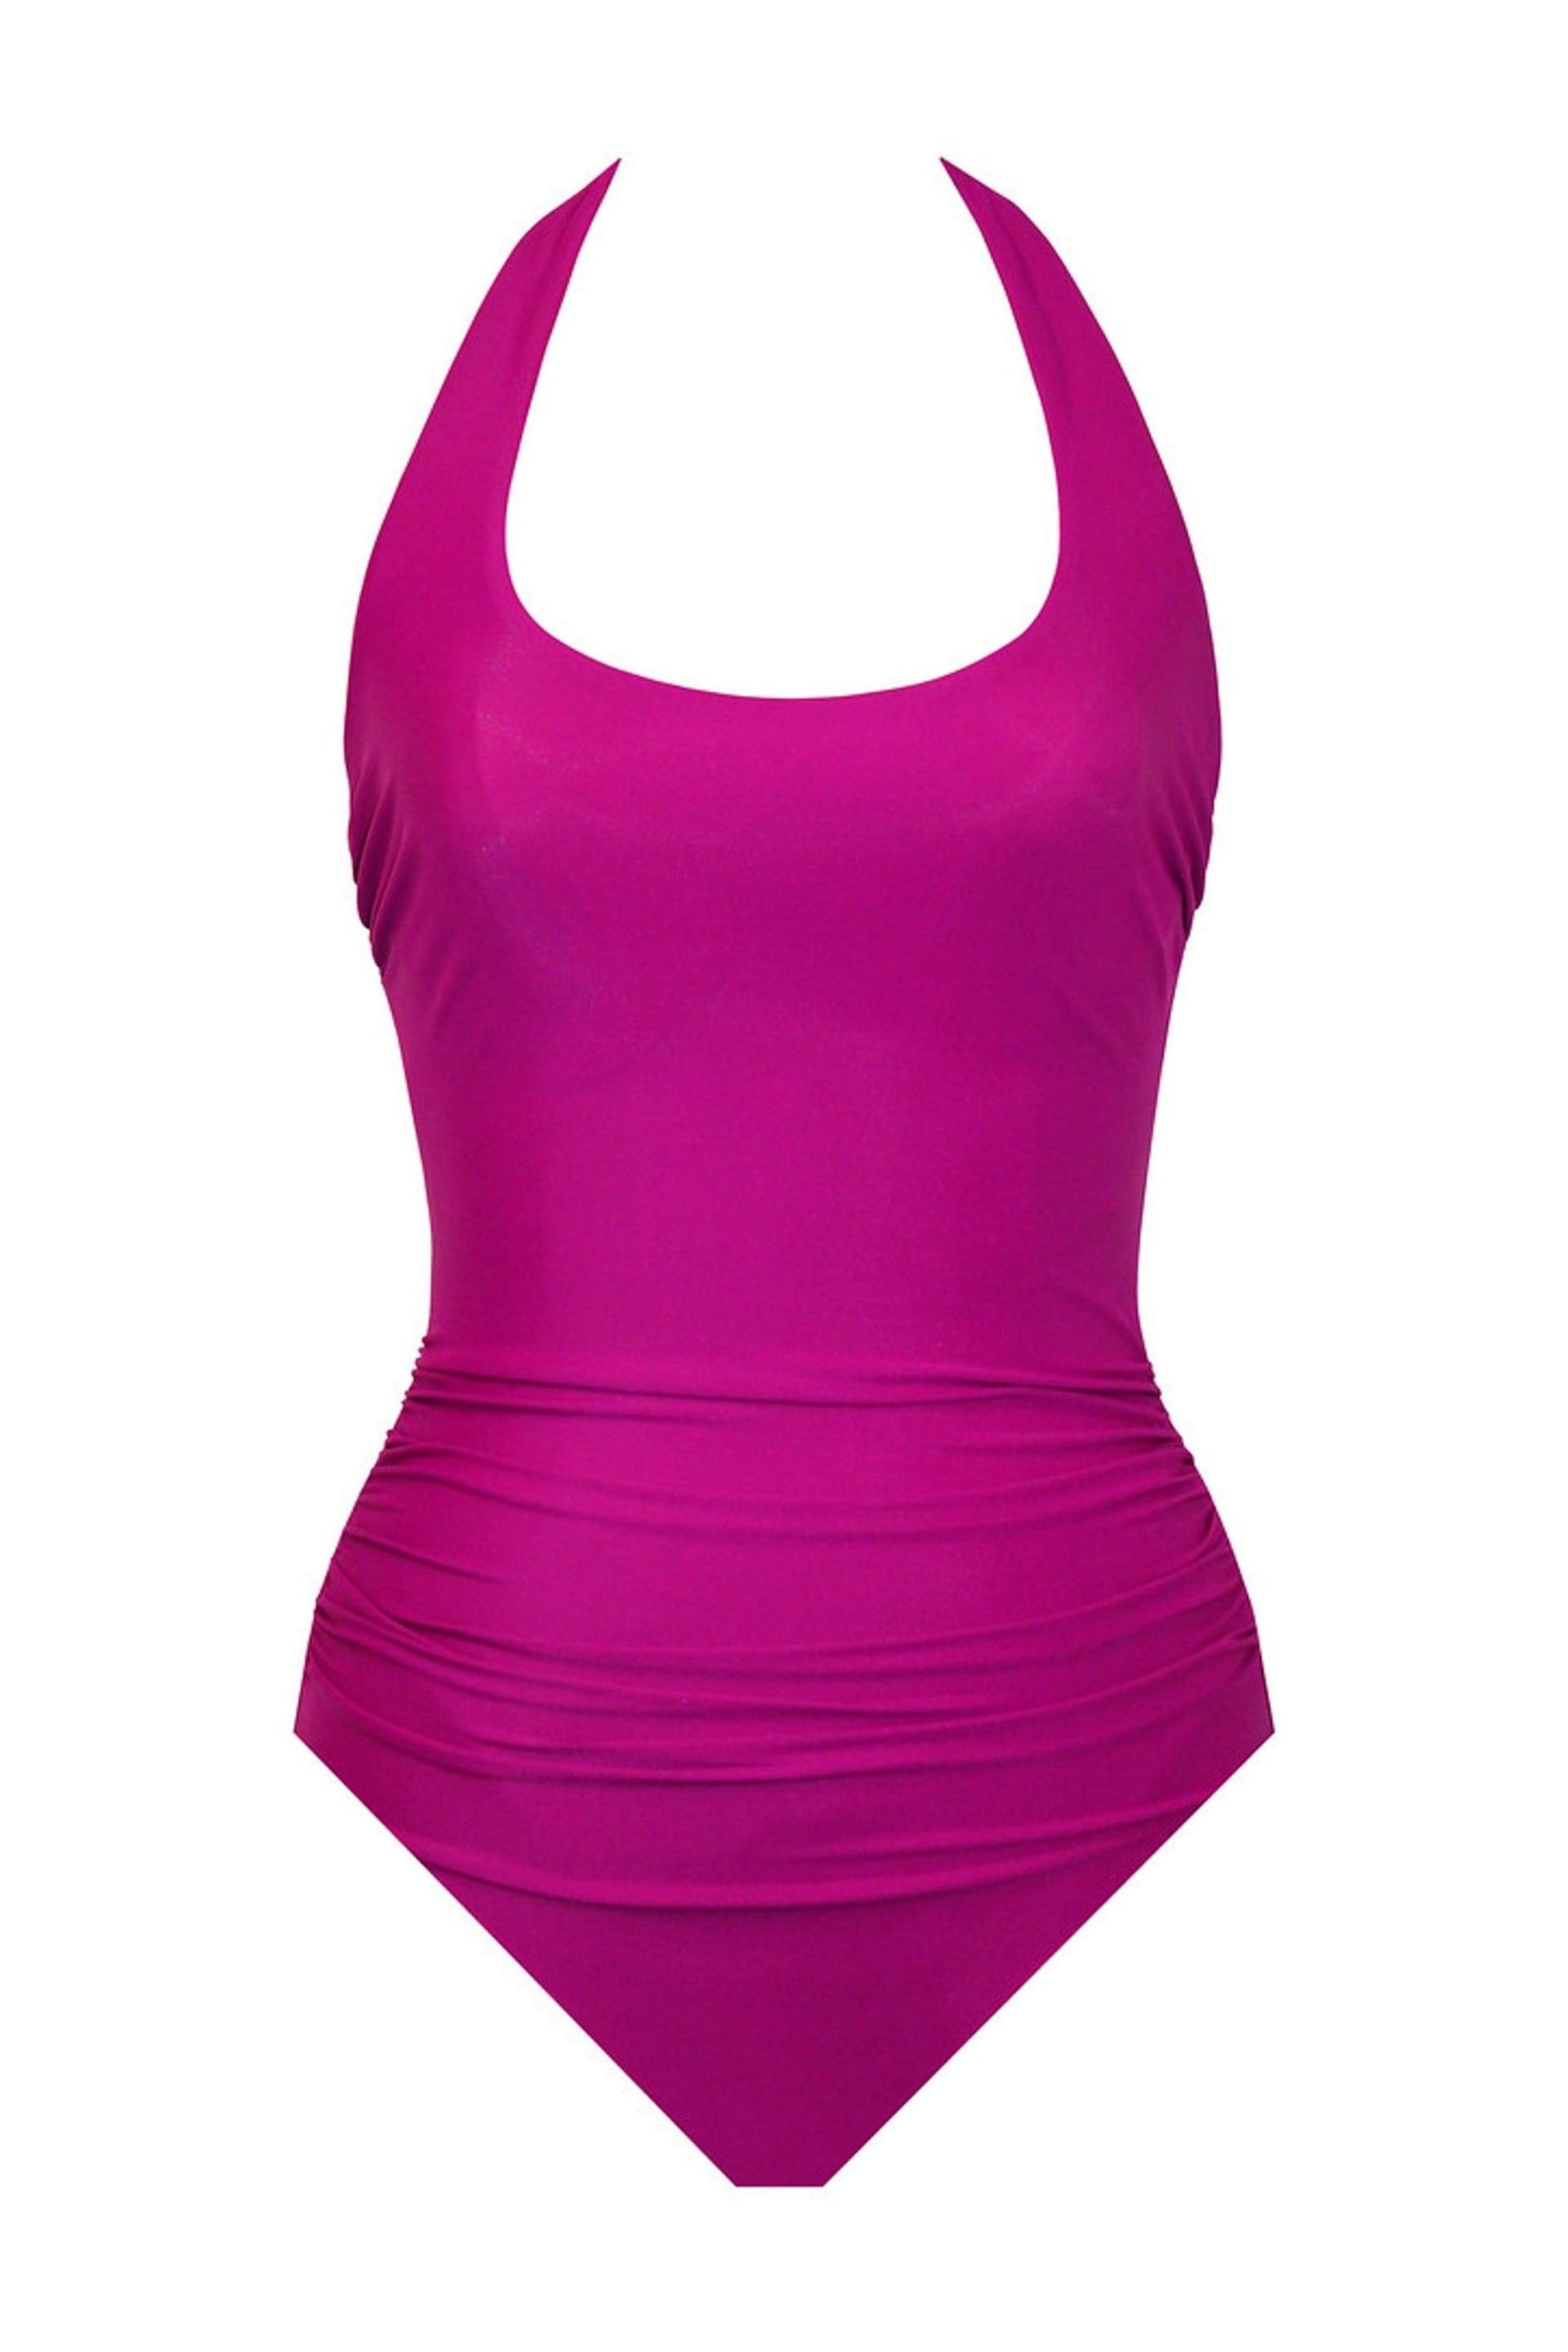 Miraclesuit Purple Tummy Control Utopia Halterneck Swimsuit In Framboise - Image 5 of 5